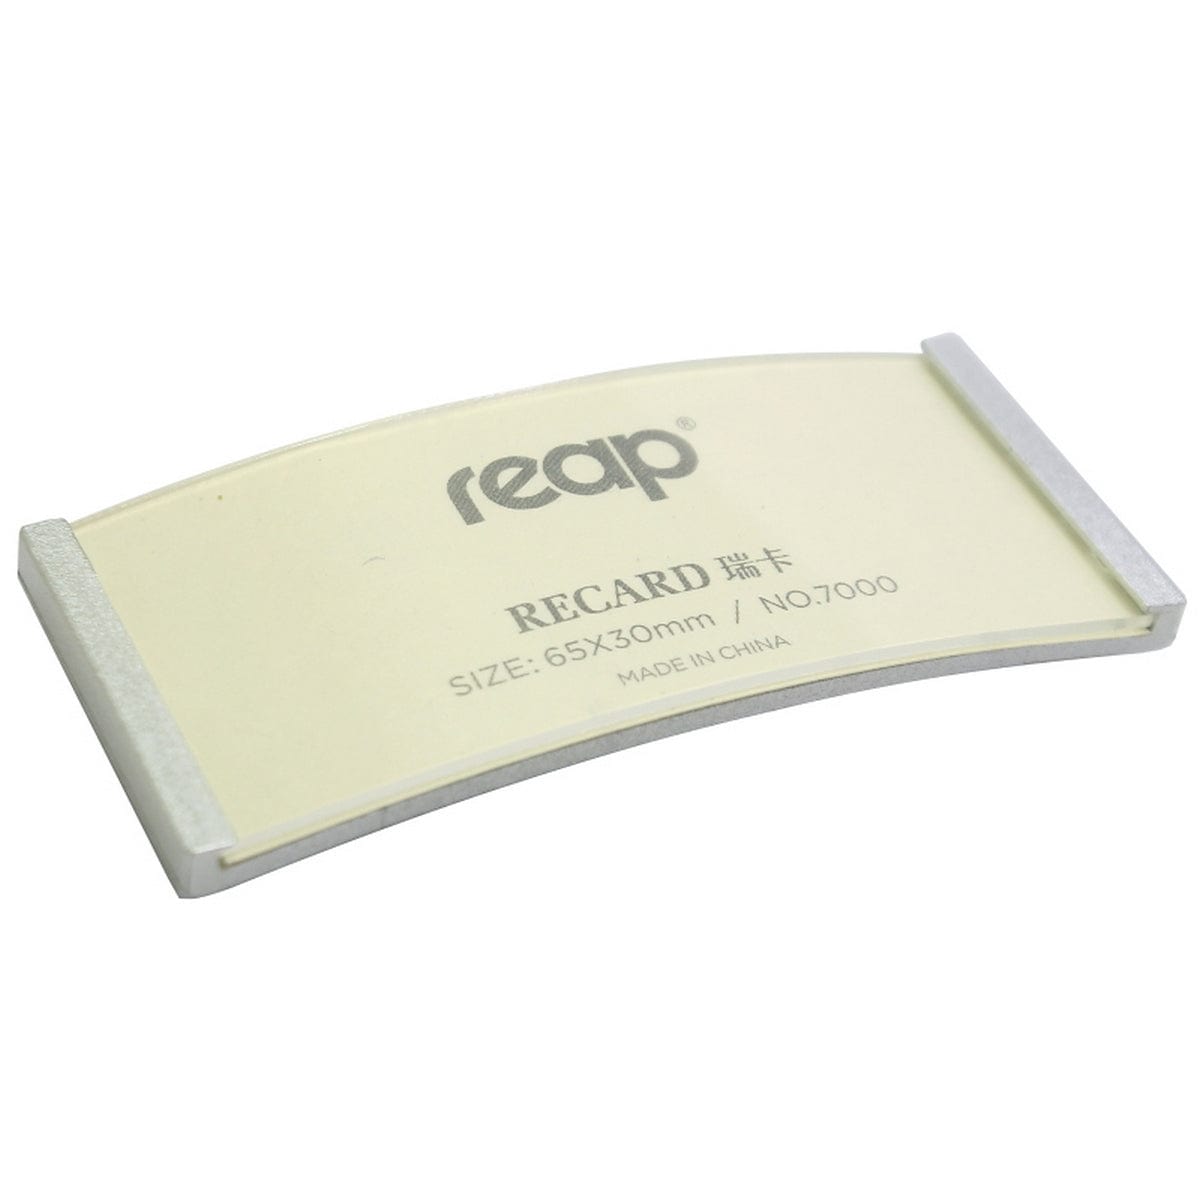 jags-mumbai Card Holders & Name Badges Magnetic Batch Silver 65X30mm Plastic Plate